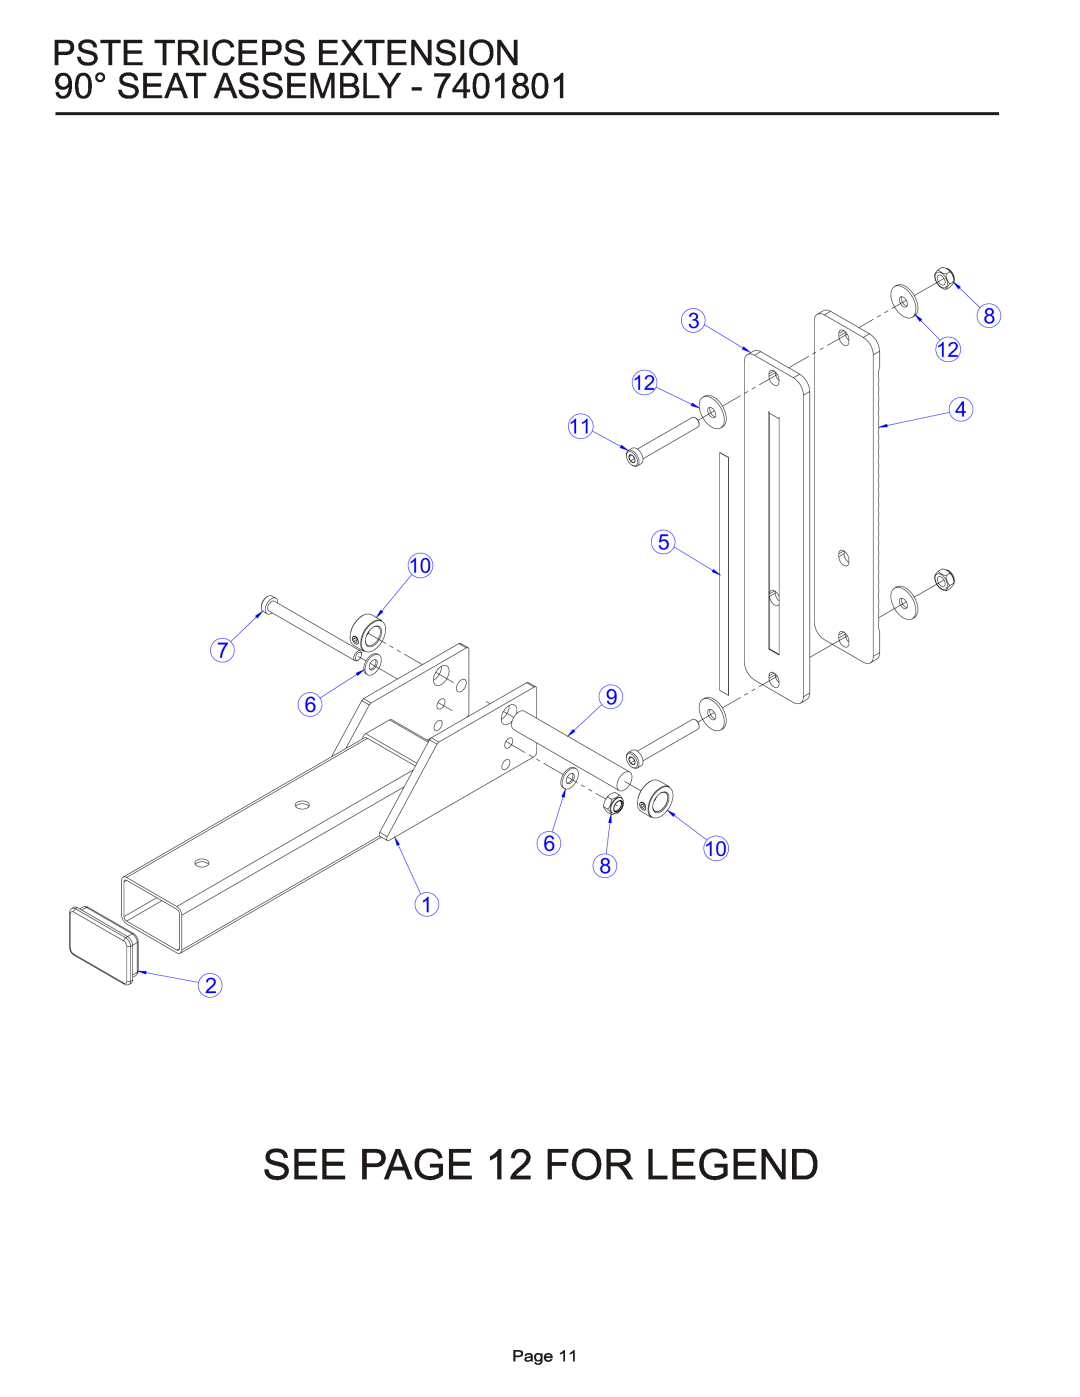 Life Fitness manual SEE PAGE 12 FOR LEGEND, PSTE TRICEPS EXTENSION 90 SEAT ASSEMBLY, Page 